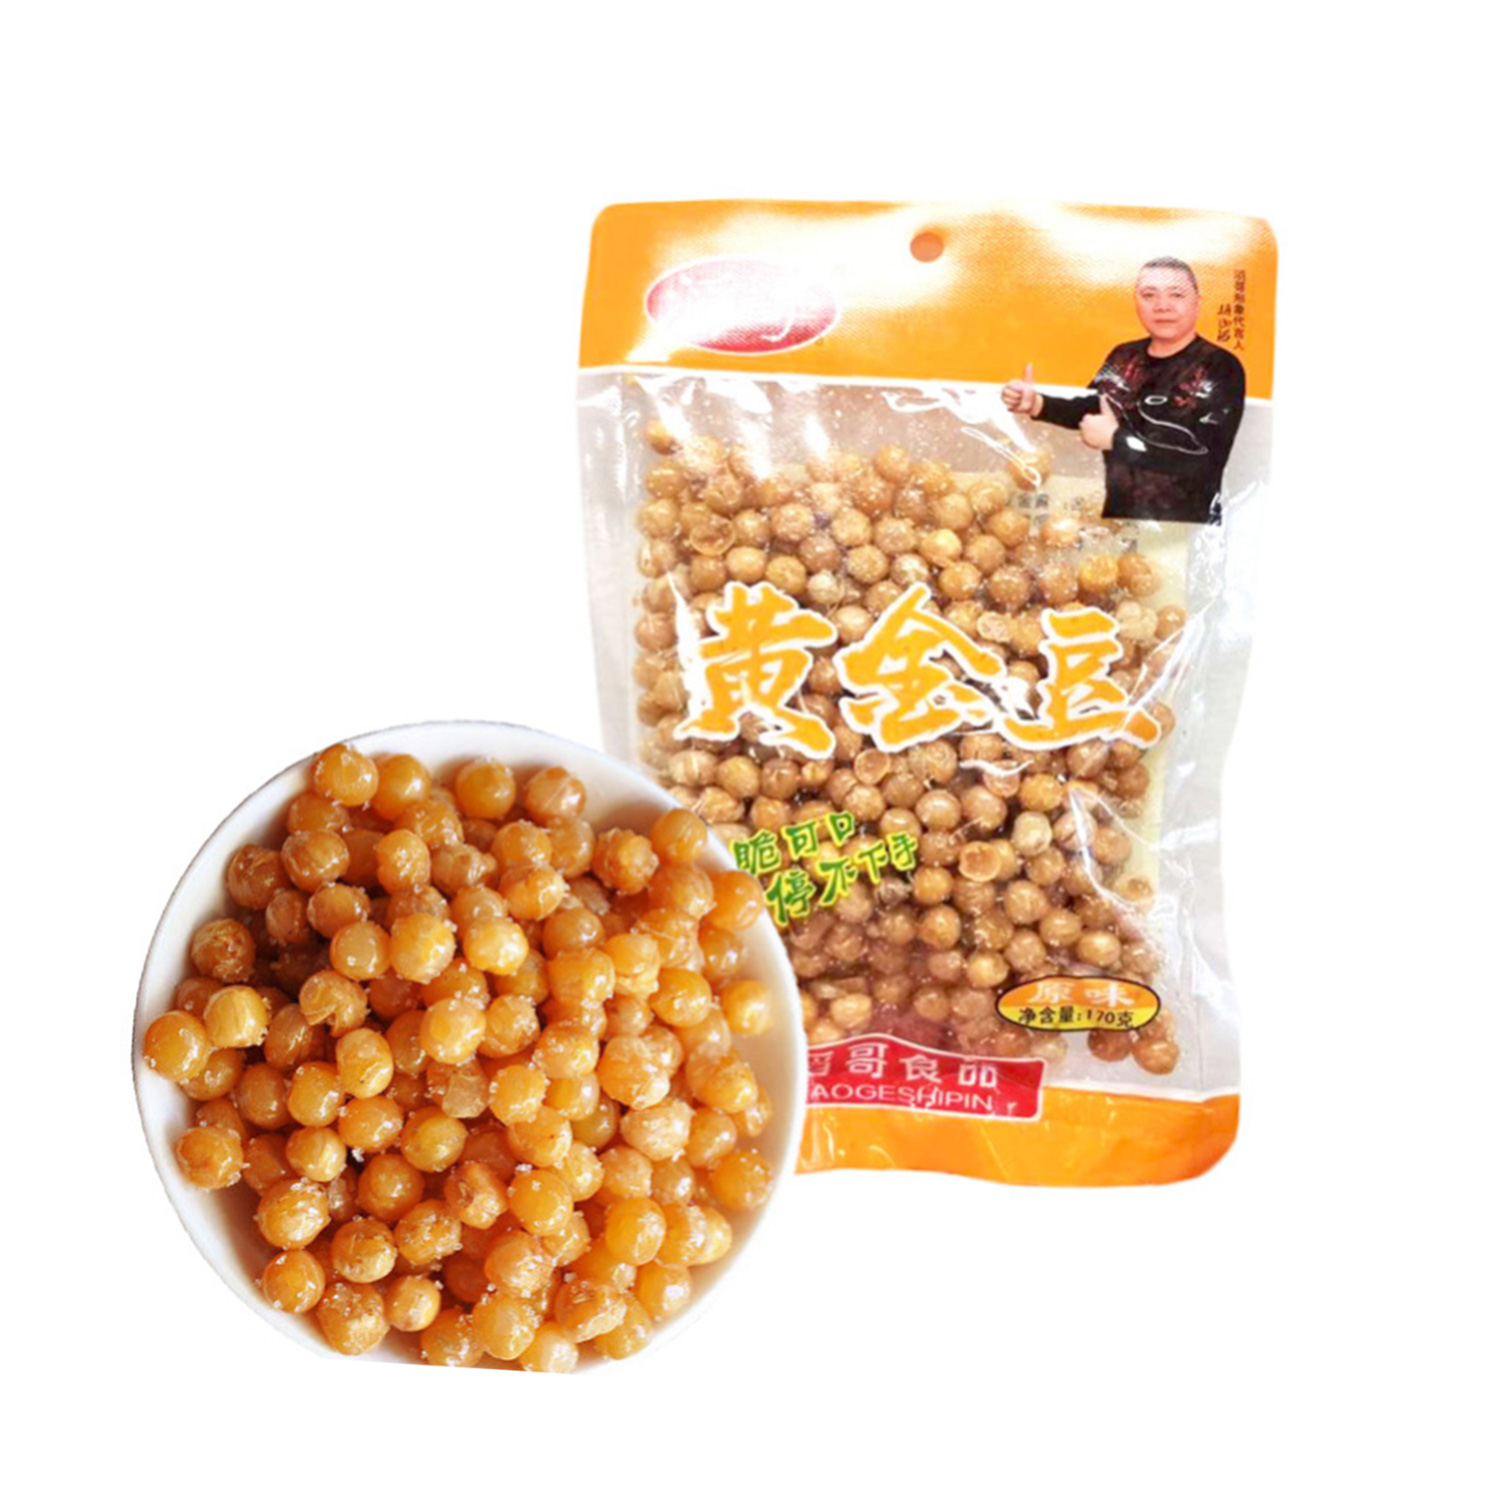 Haidilao Taoge golden peas snack 170g-eBest-Nuts & Dried Fruit,Snacks & Confectionery